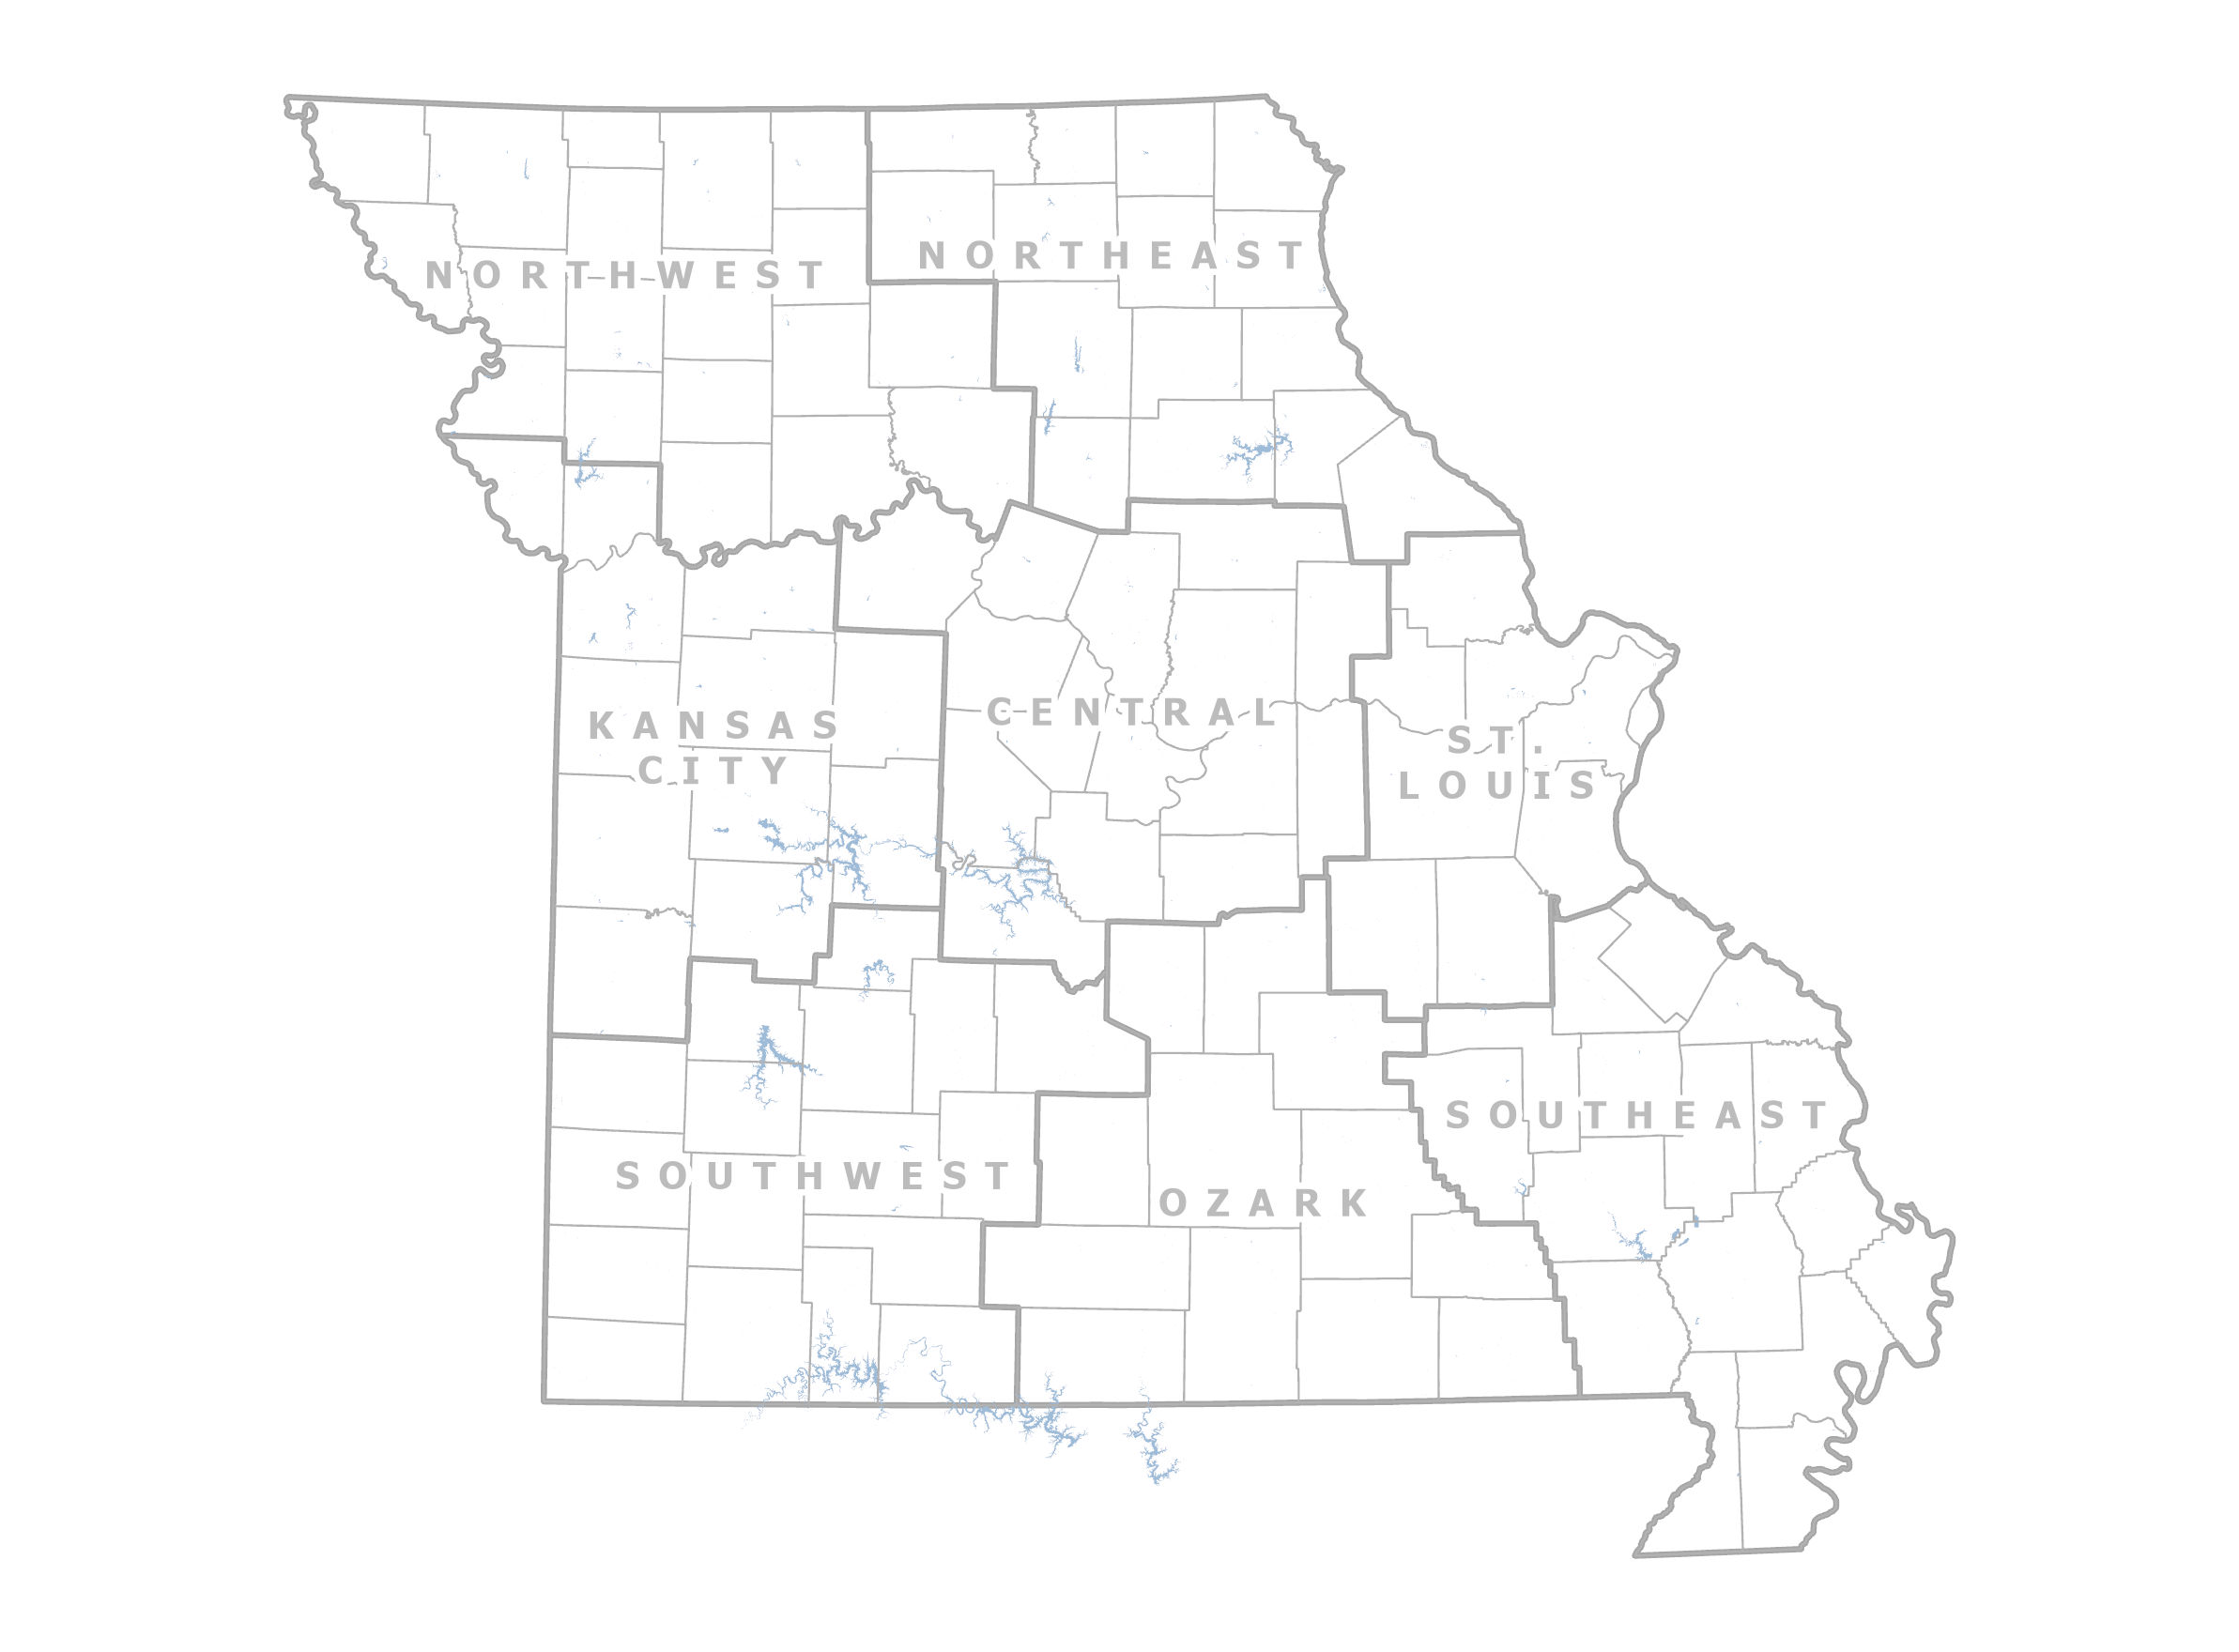 Map outlining the 8 different MDC regions in Missouri.